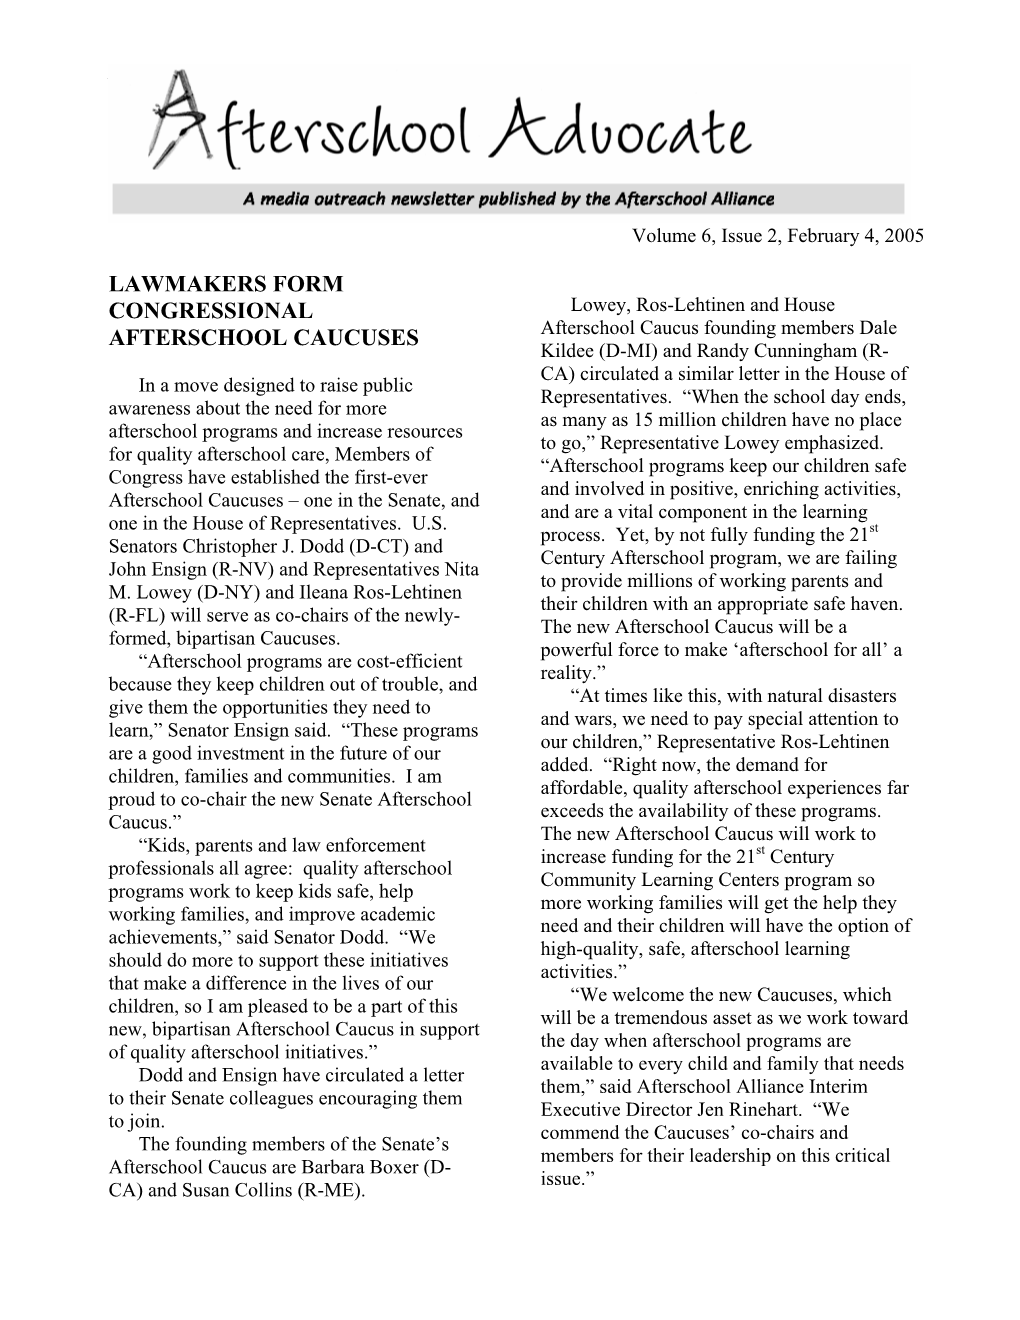 Afterschool Advocate Page 1 Volume 6, Issue 2, February 4, 2005